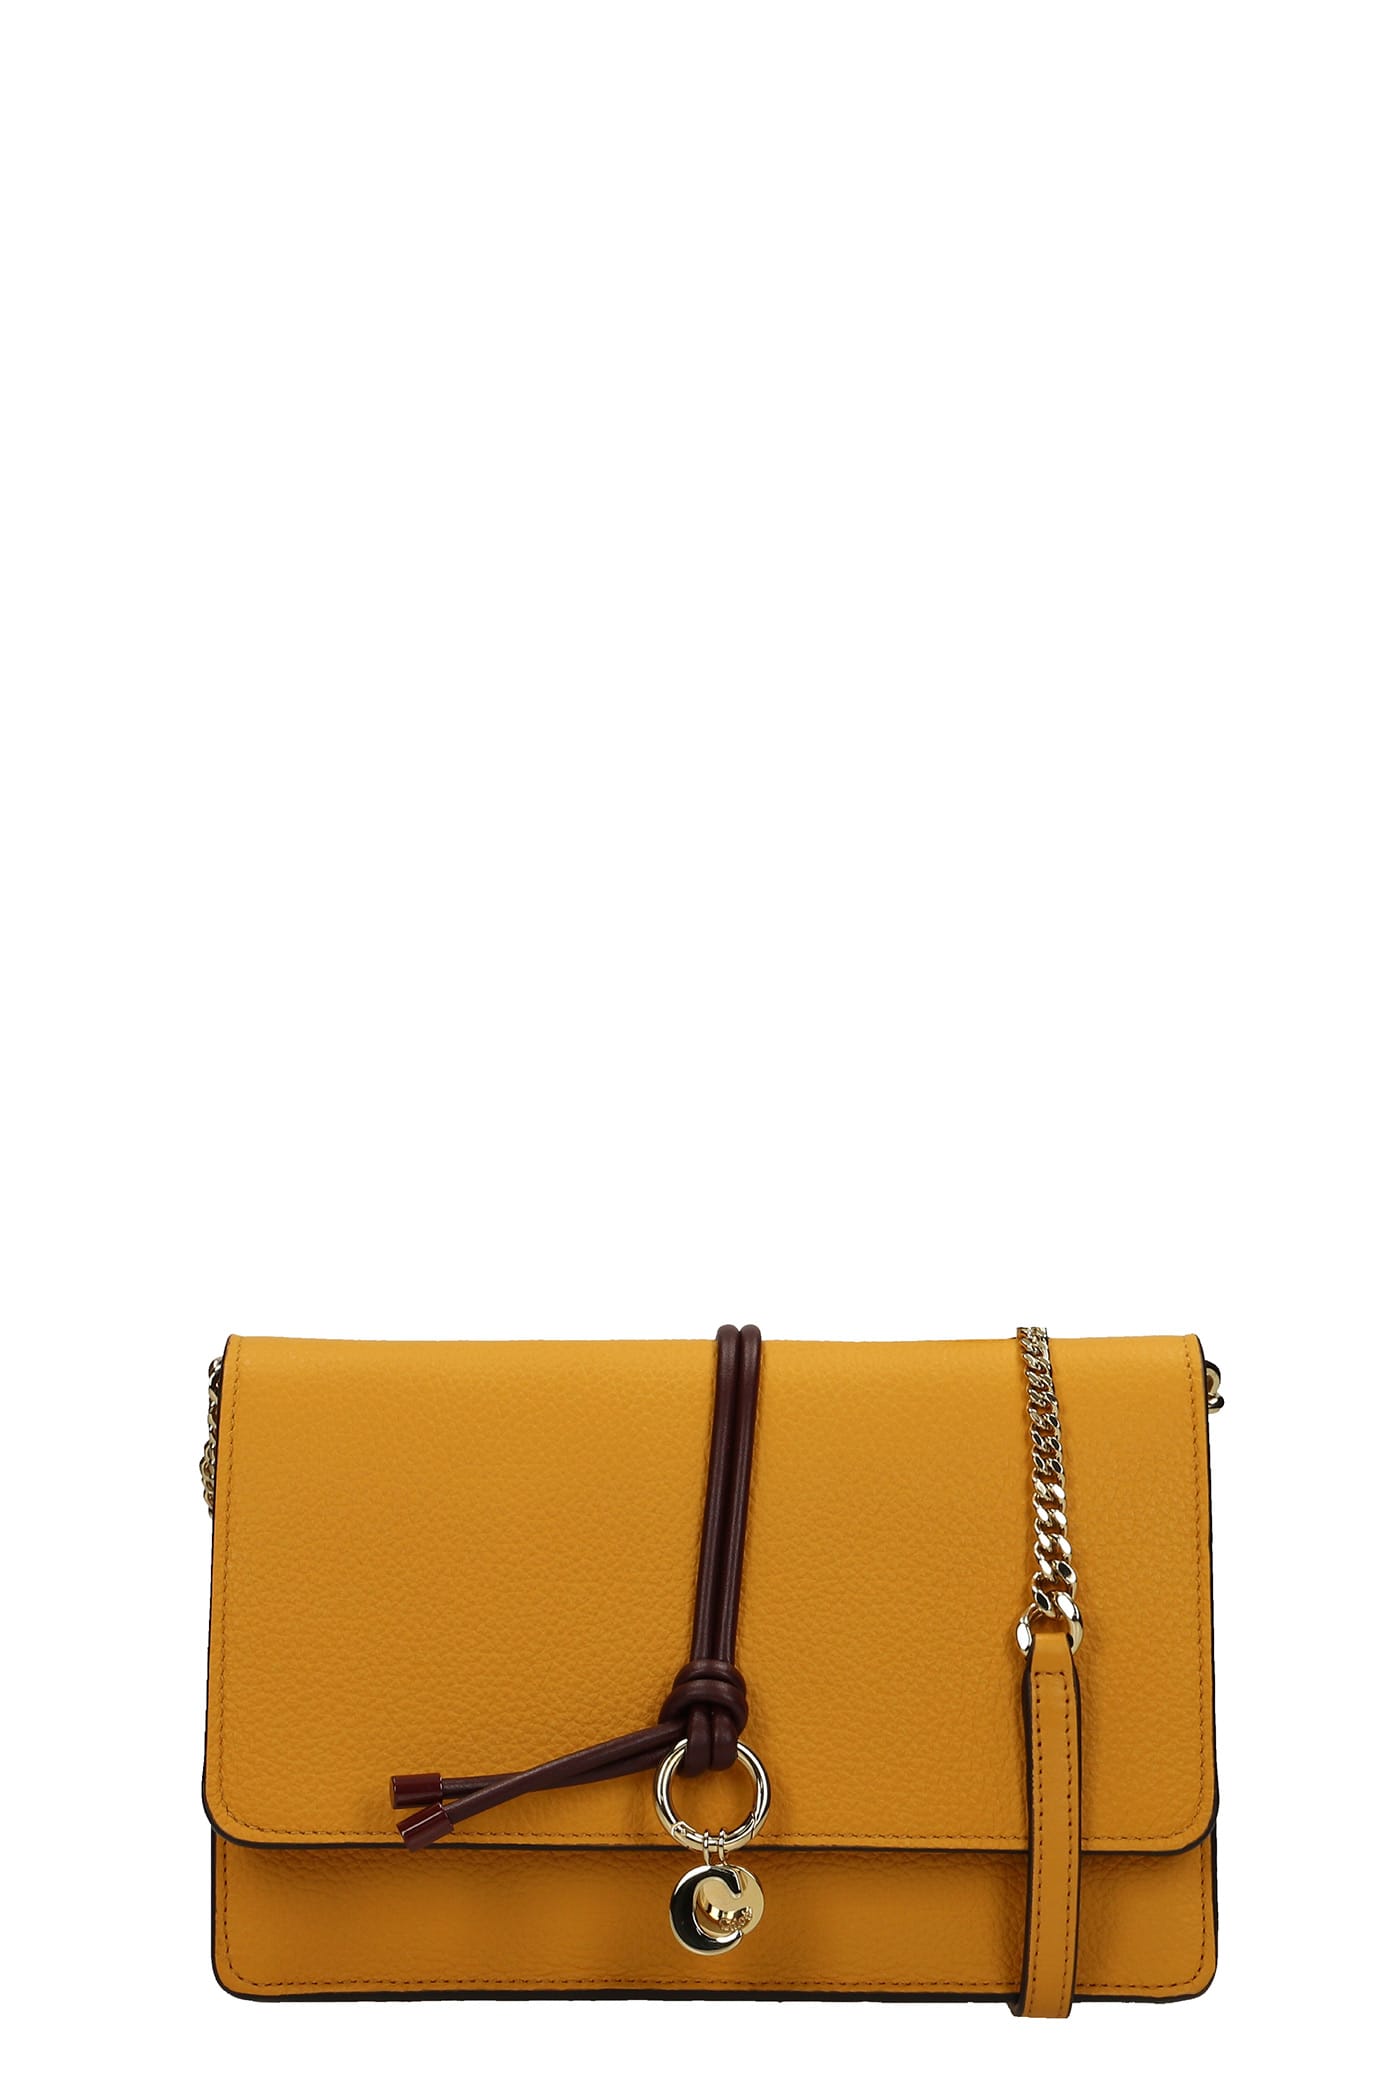 Chloé Alphabet Shoulder Bag In Yellow Leather